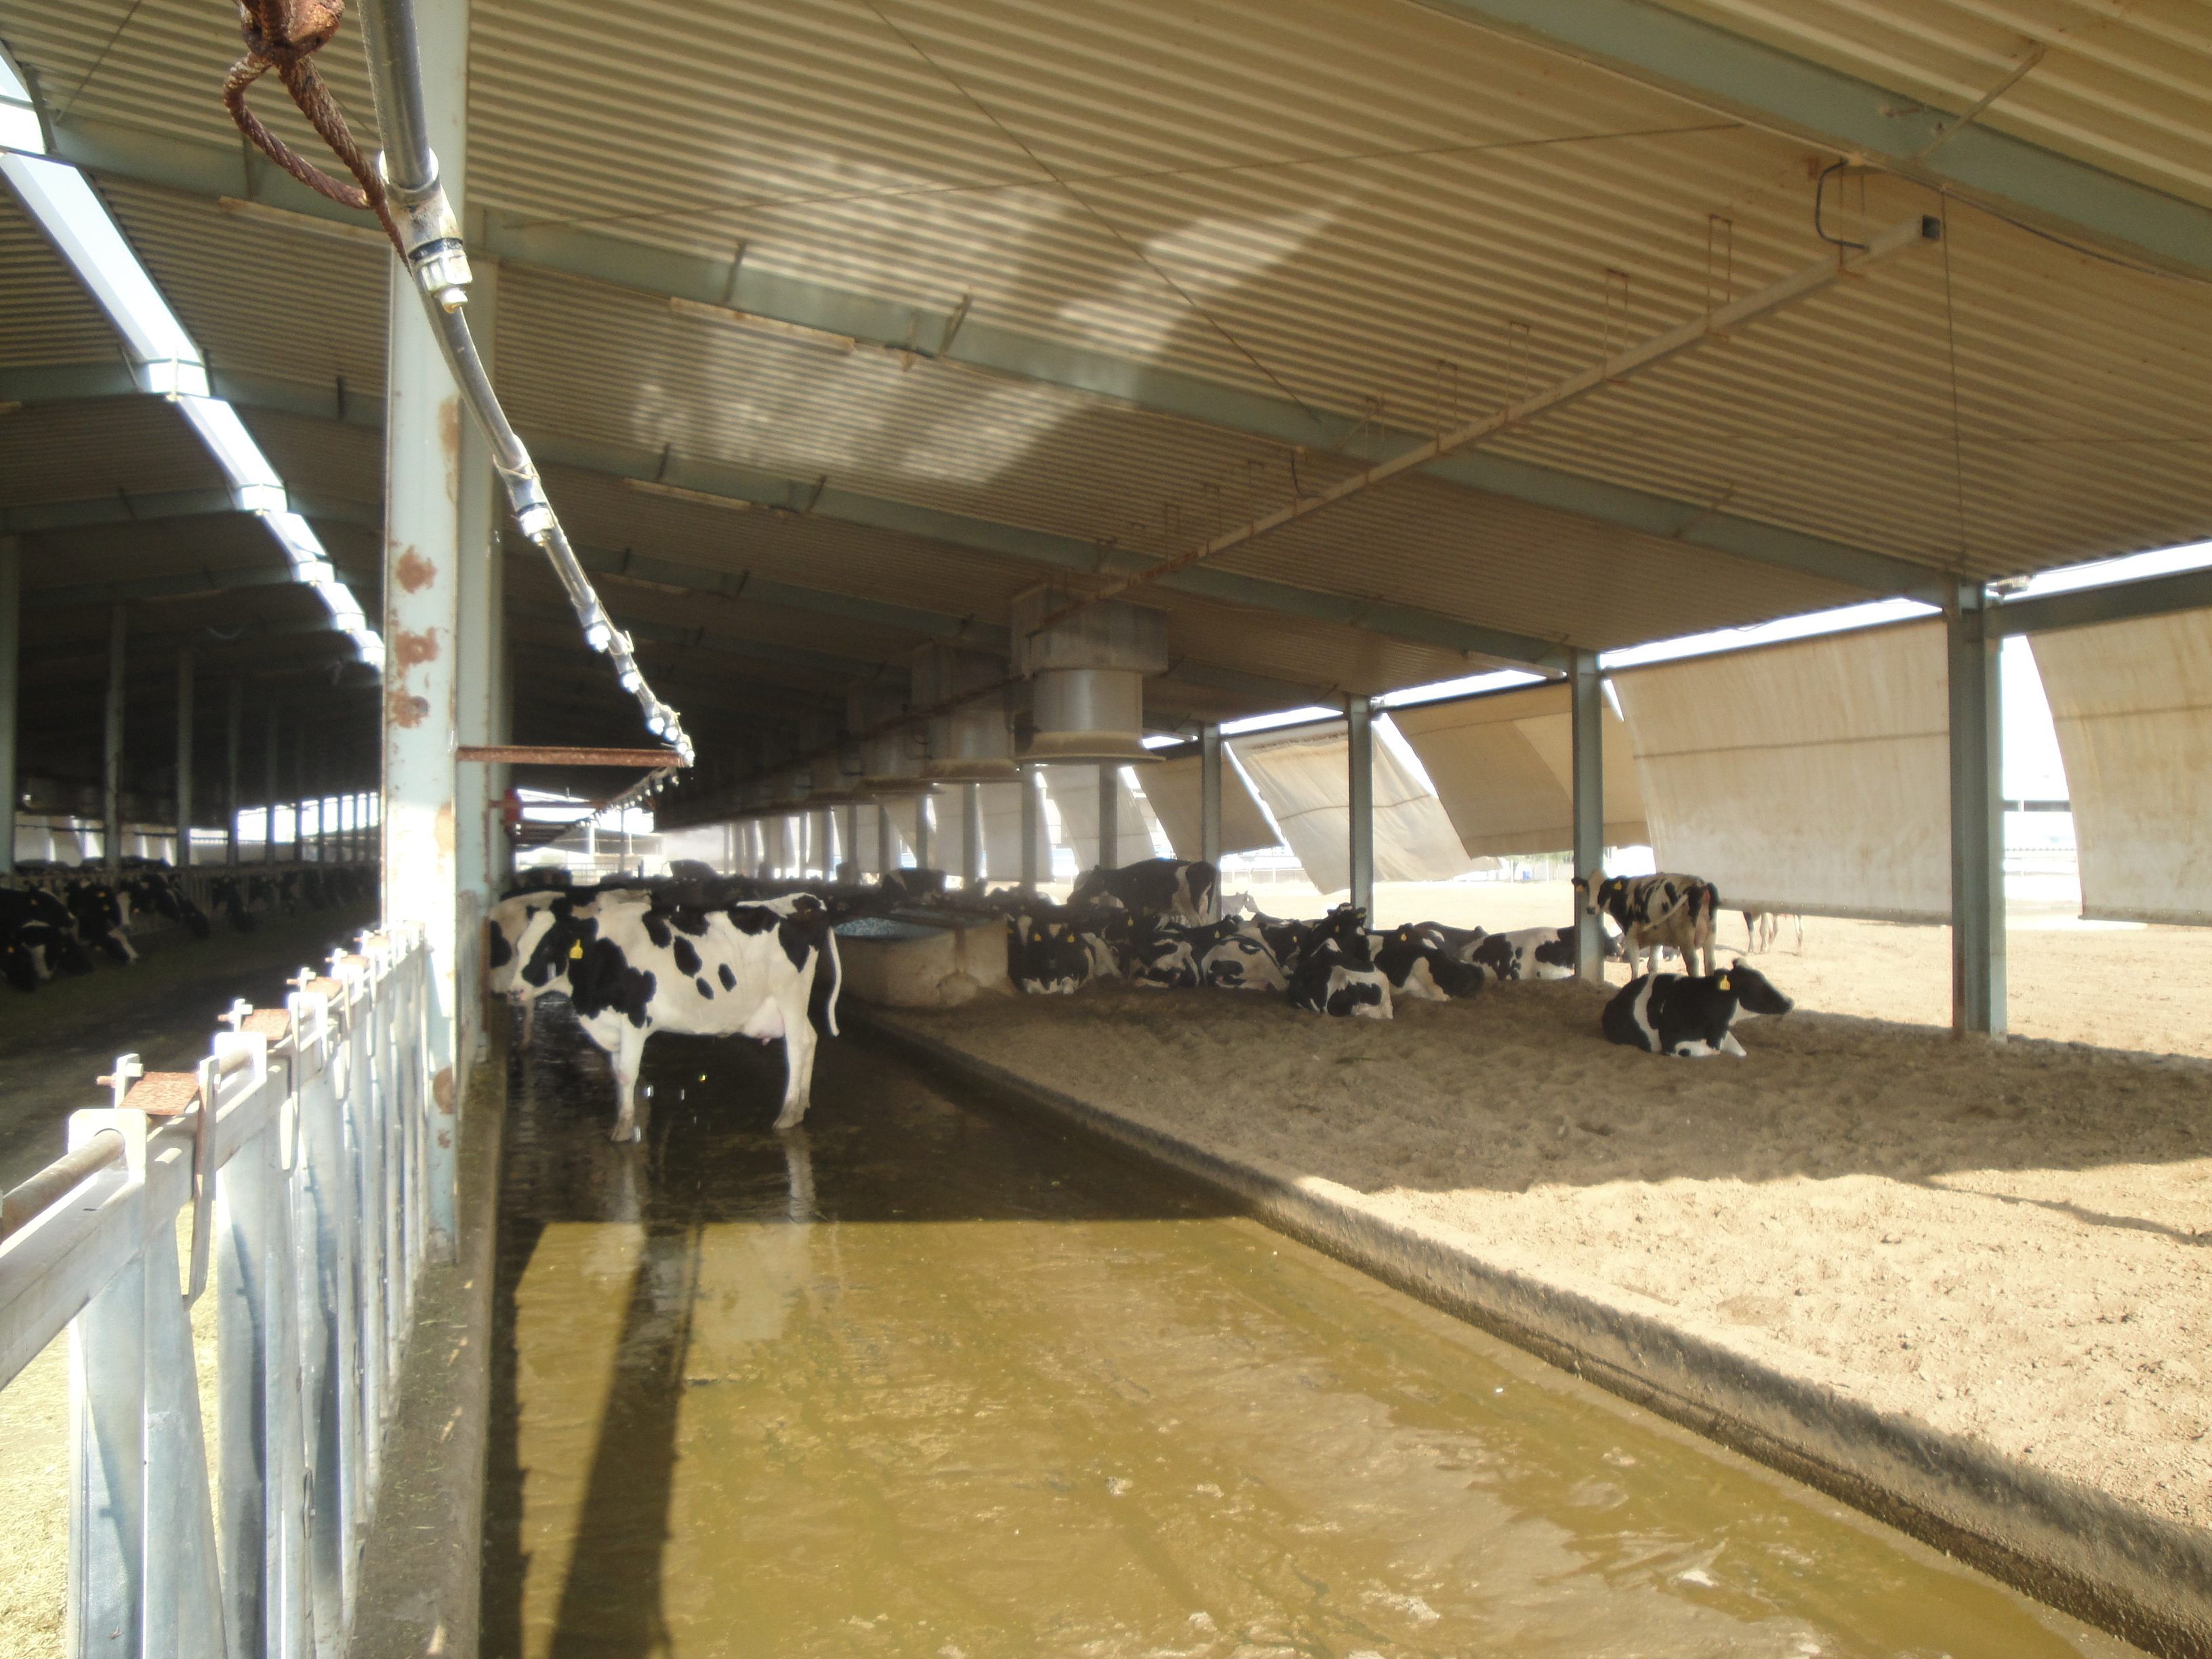 Inside the cowshed